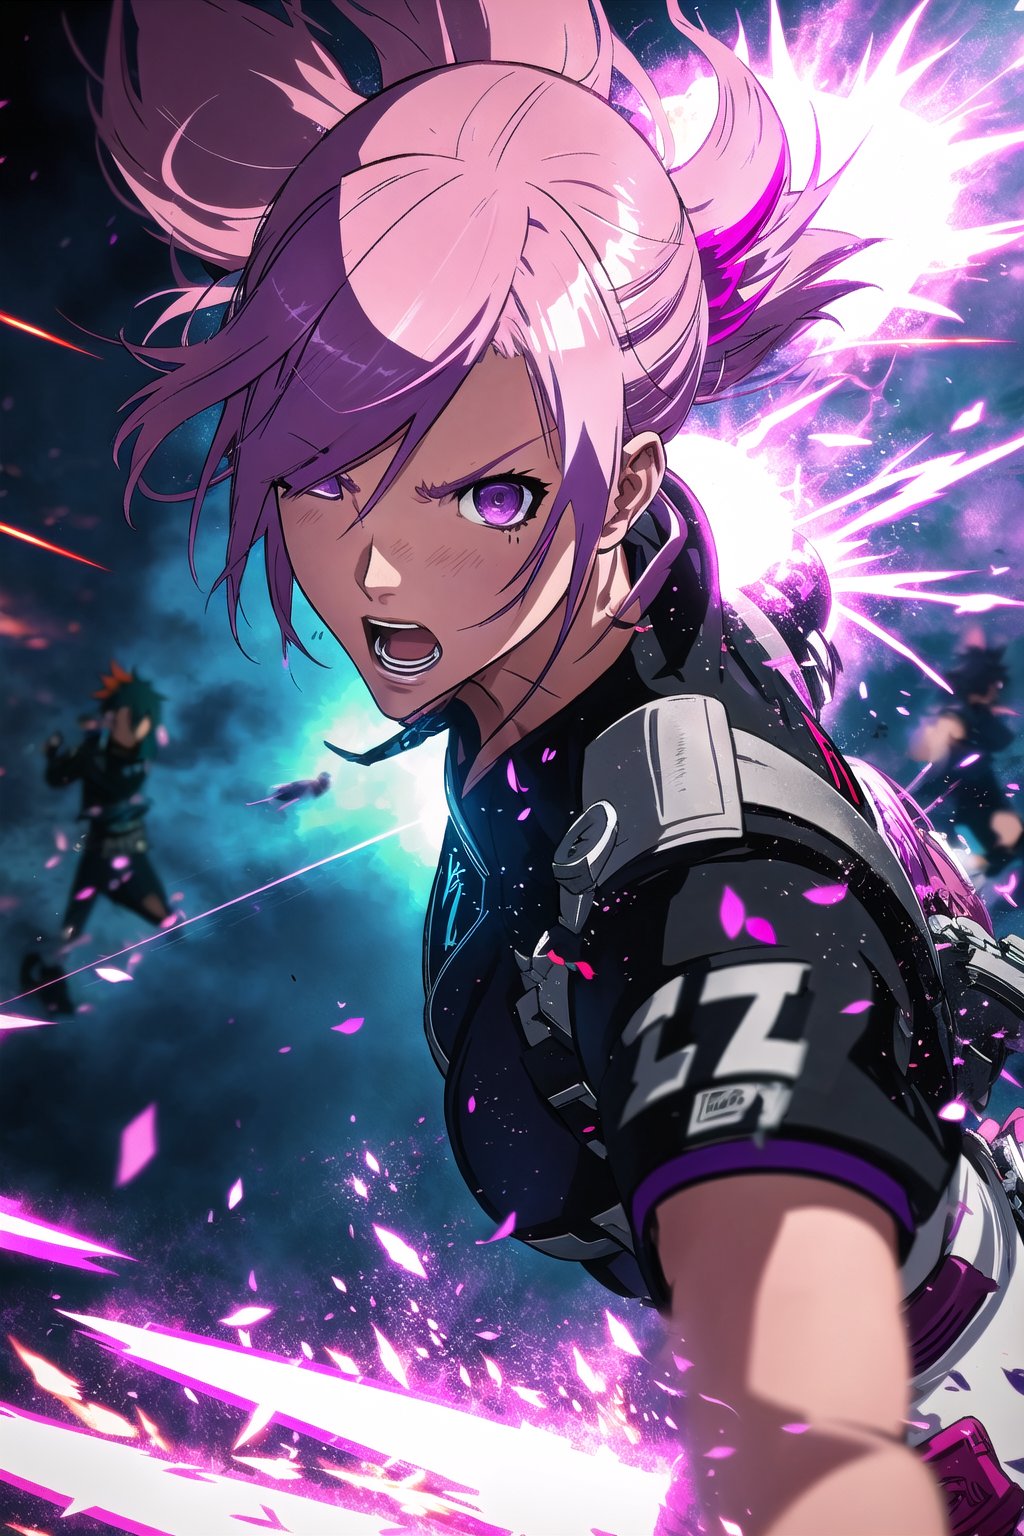 guiltys, angry, a girl, purple eyes, pink hair, fighting, upper body, (bokeh:1.1), depth of field, by Akihiko Yoshida, tracers, vfx, splashes, lightning, light particles, white background